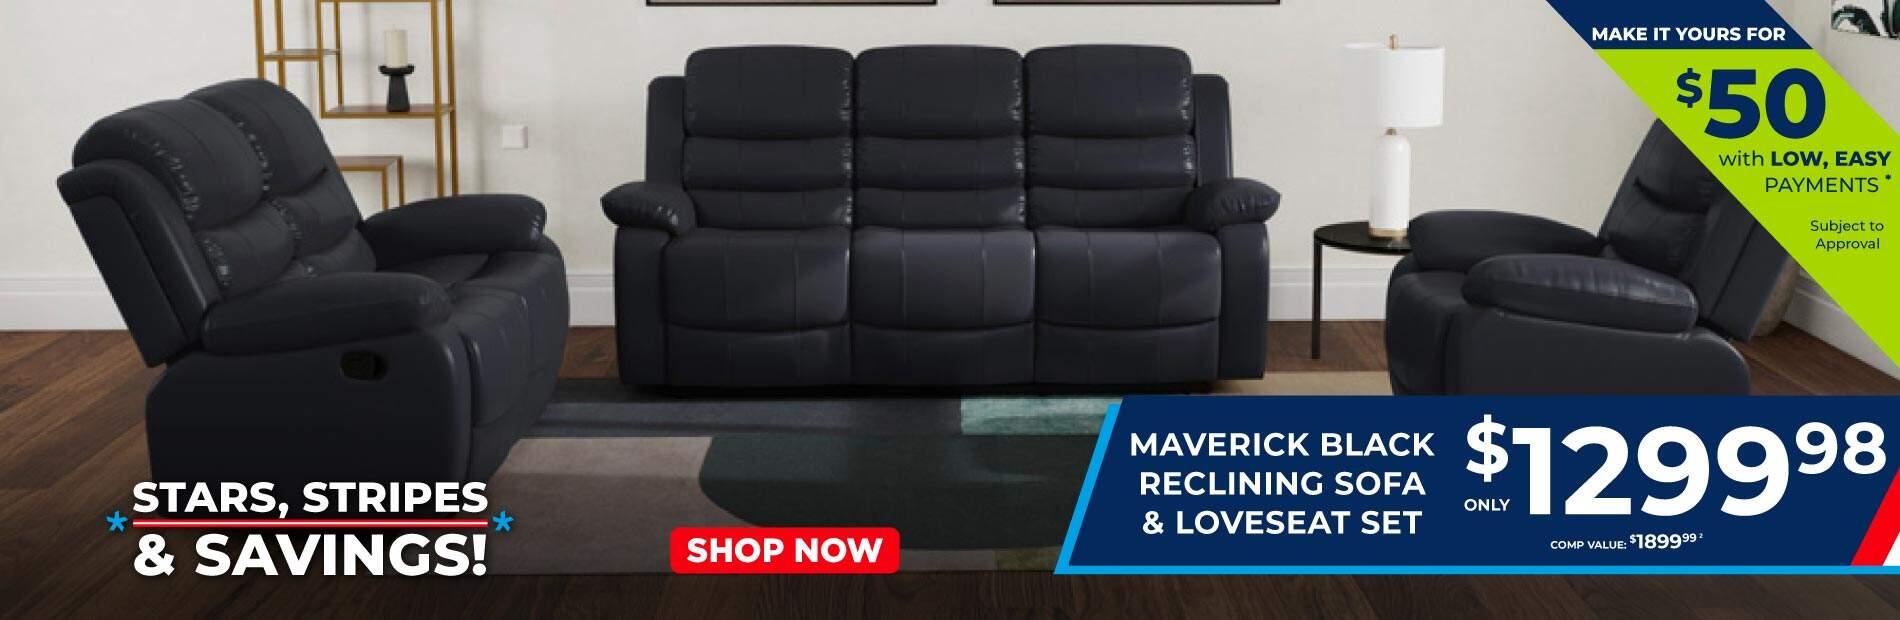 Stars, Stripes & Savings! Shop Now. Maverick Black Reclining Sofa & Loveseat Set only $1299.98. comp value $1899.98. 2. Make it yours for $50 with low, easy payments* subject to approval. 